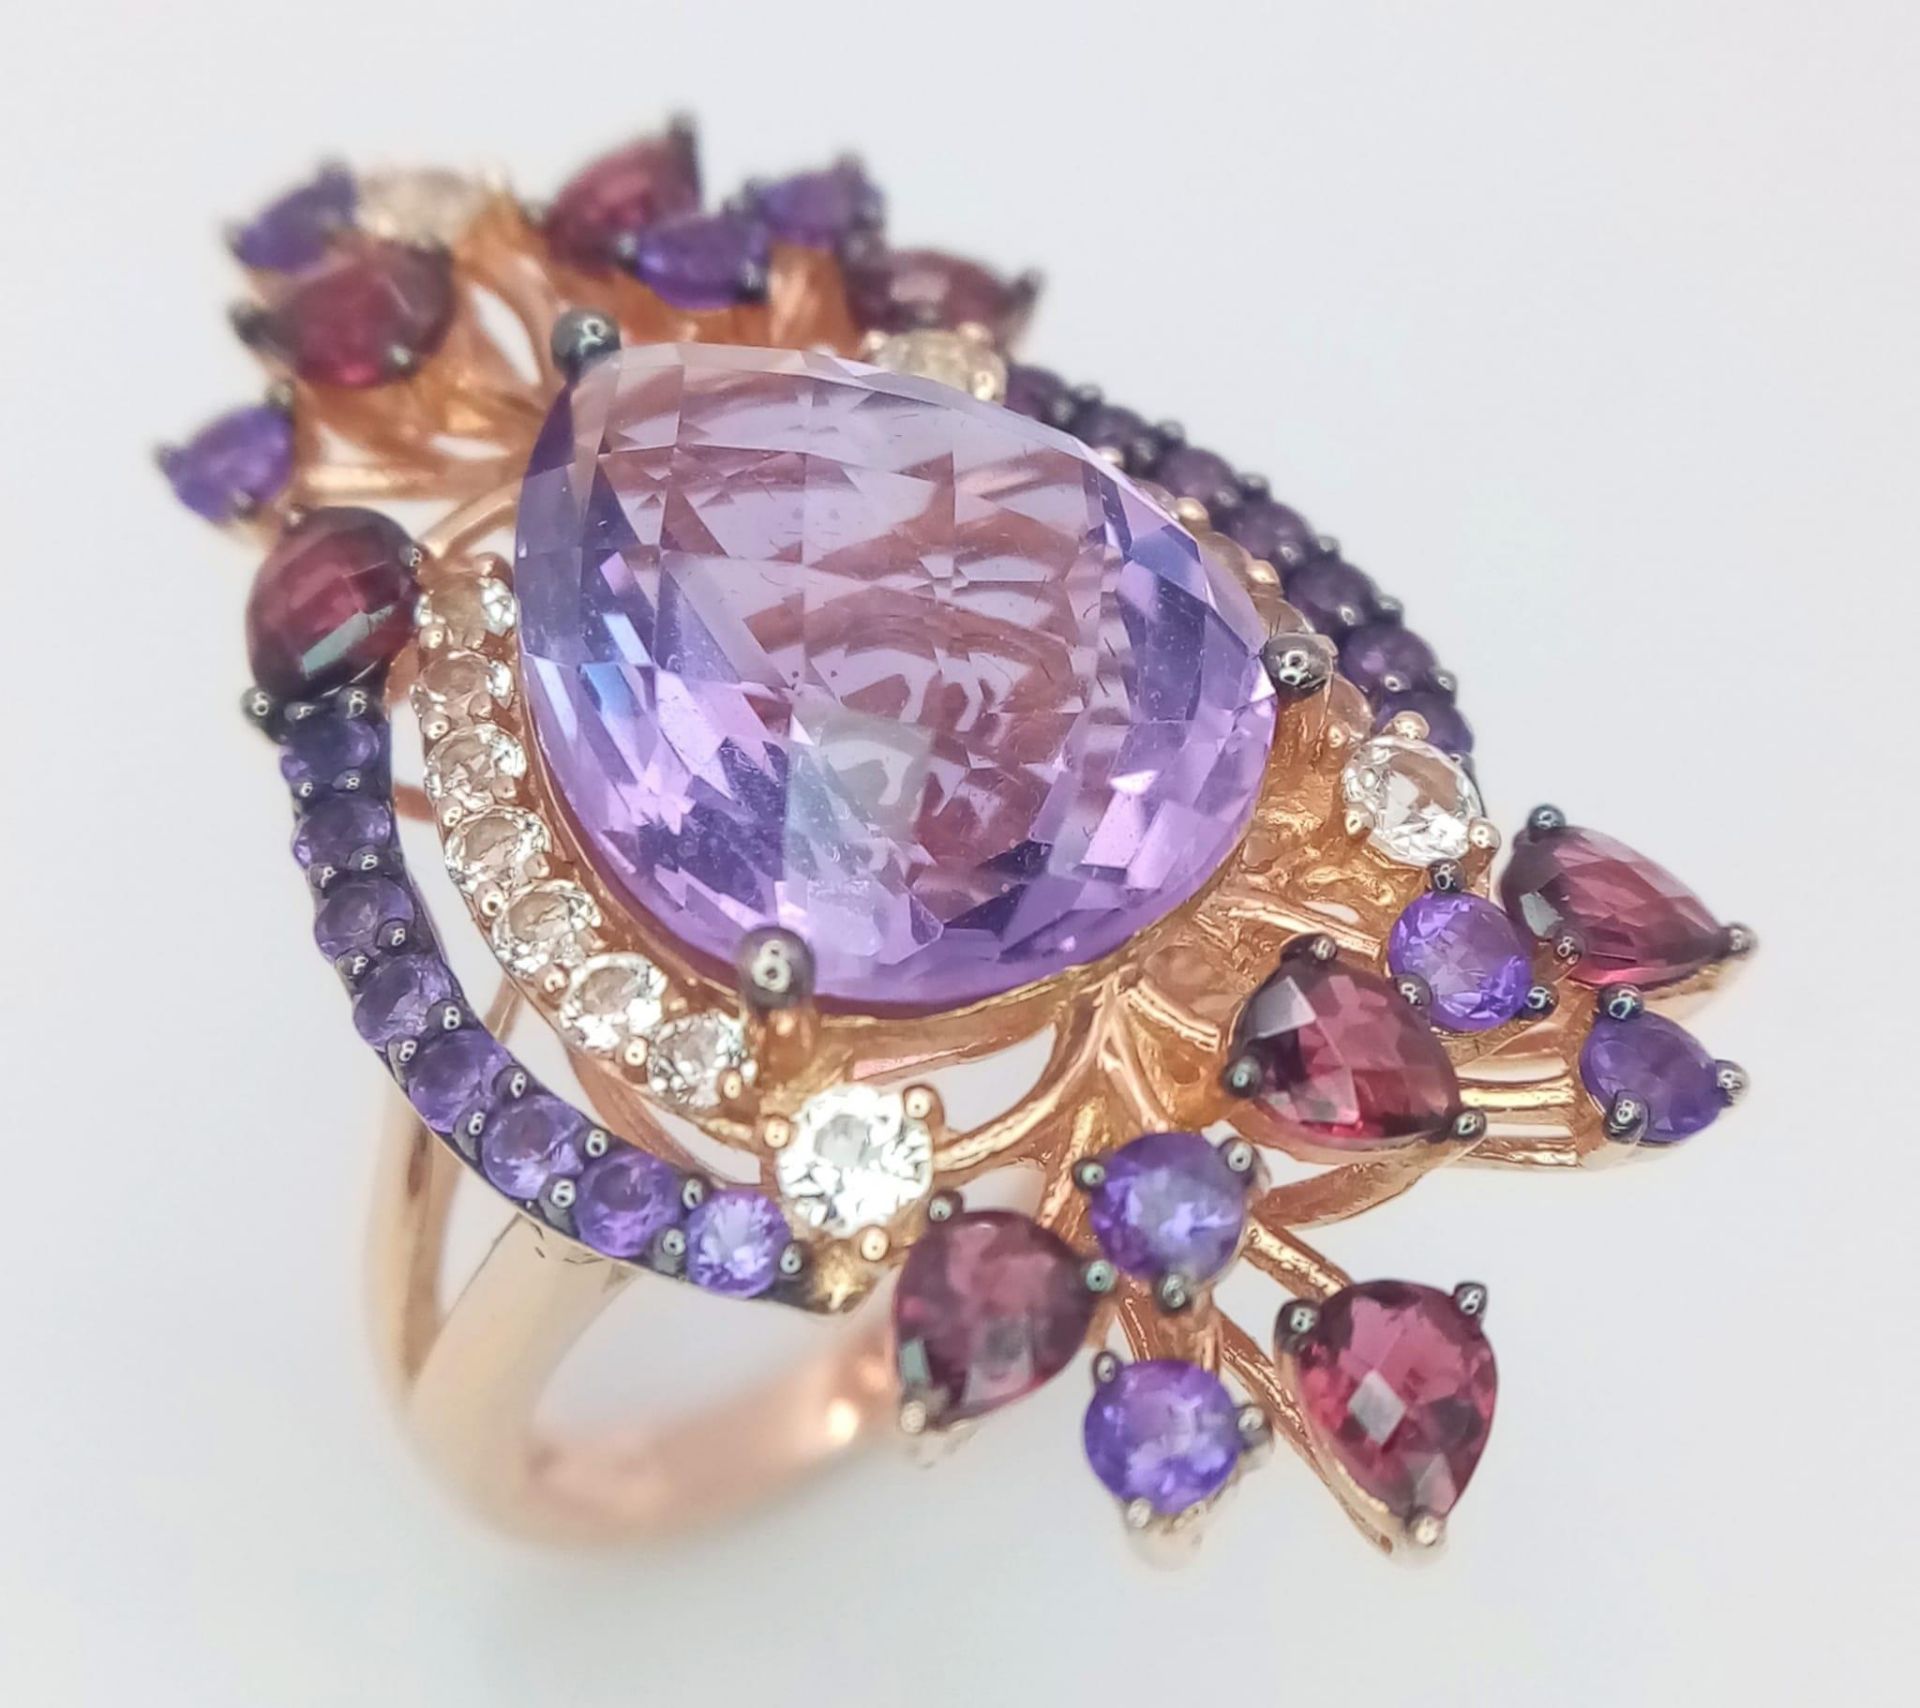 A stunning LE VIAN design, 14 K rose gold ring and earrings set with large pear shaped amethysts and - Image 8 of 11